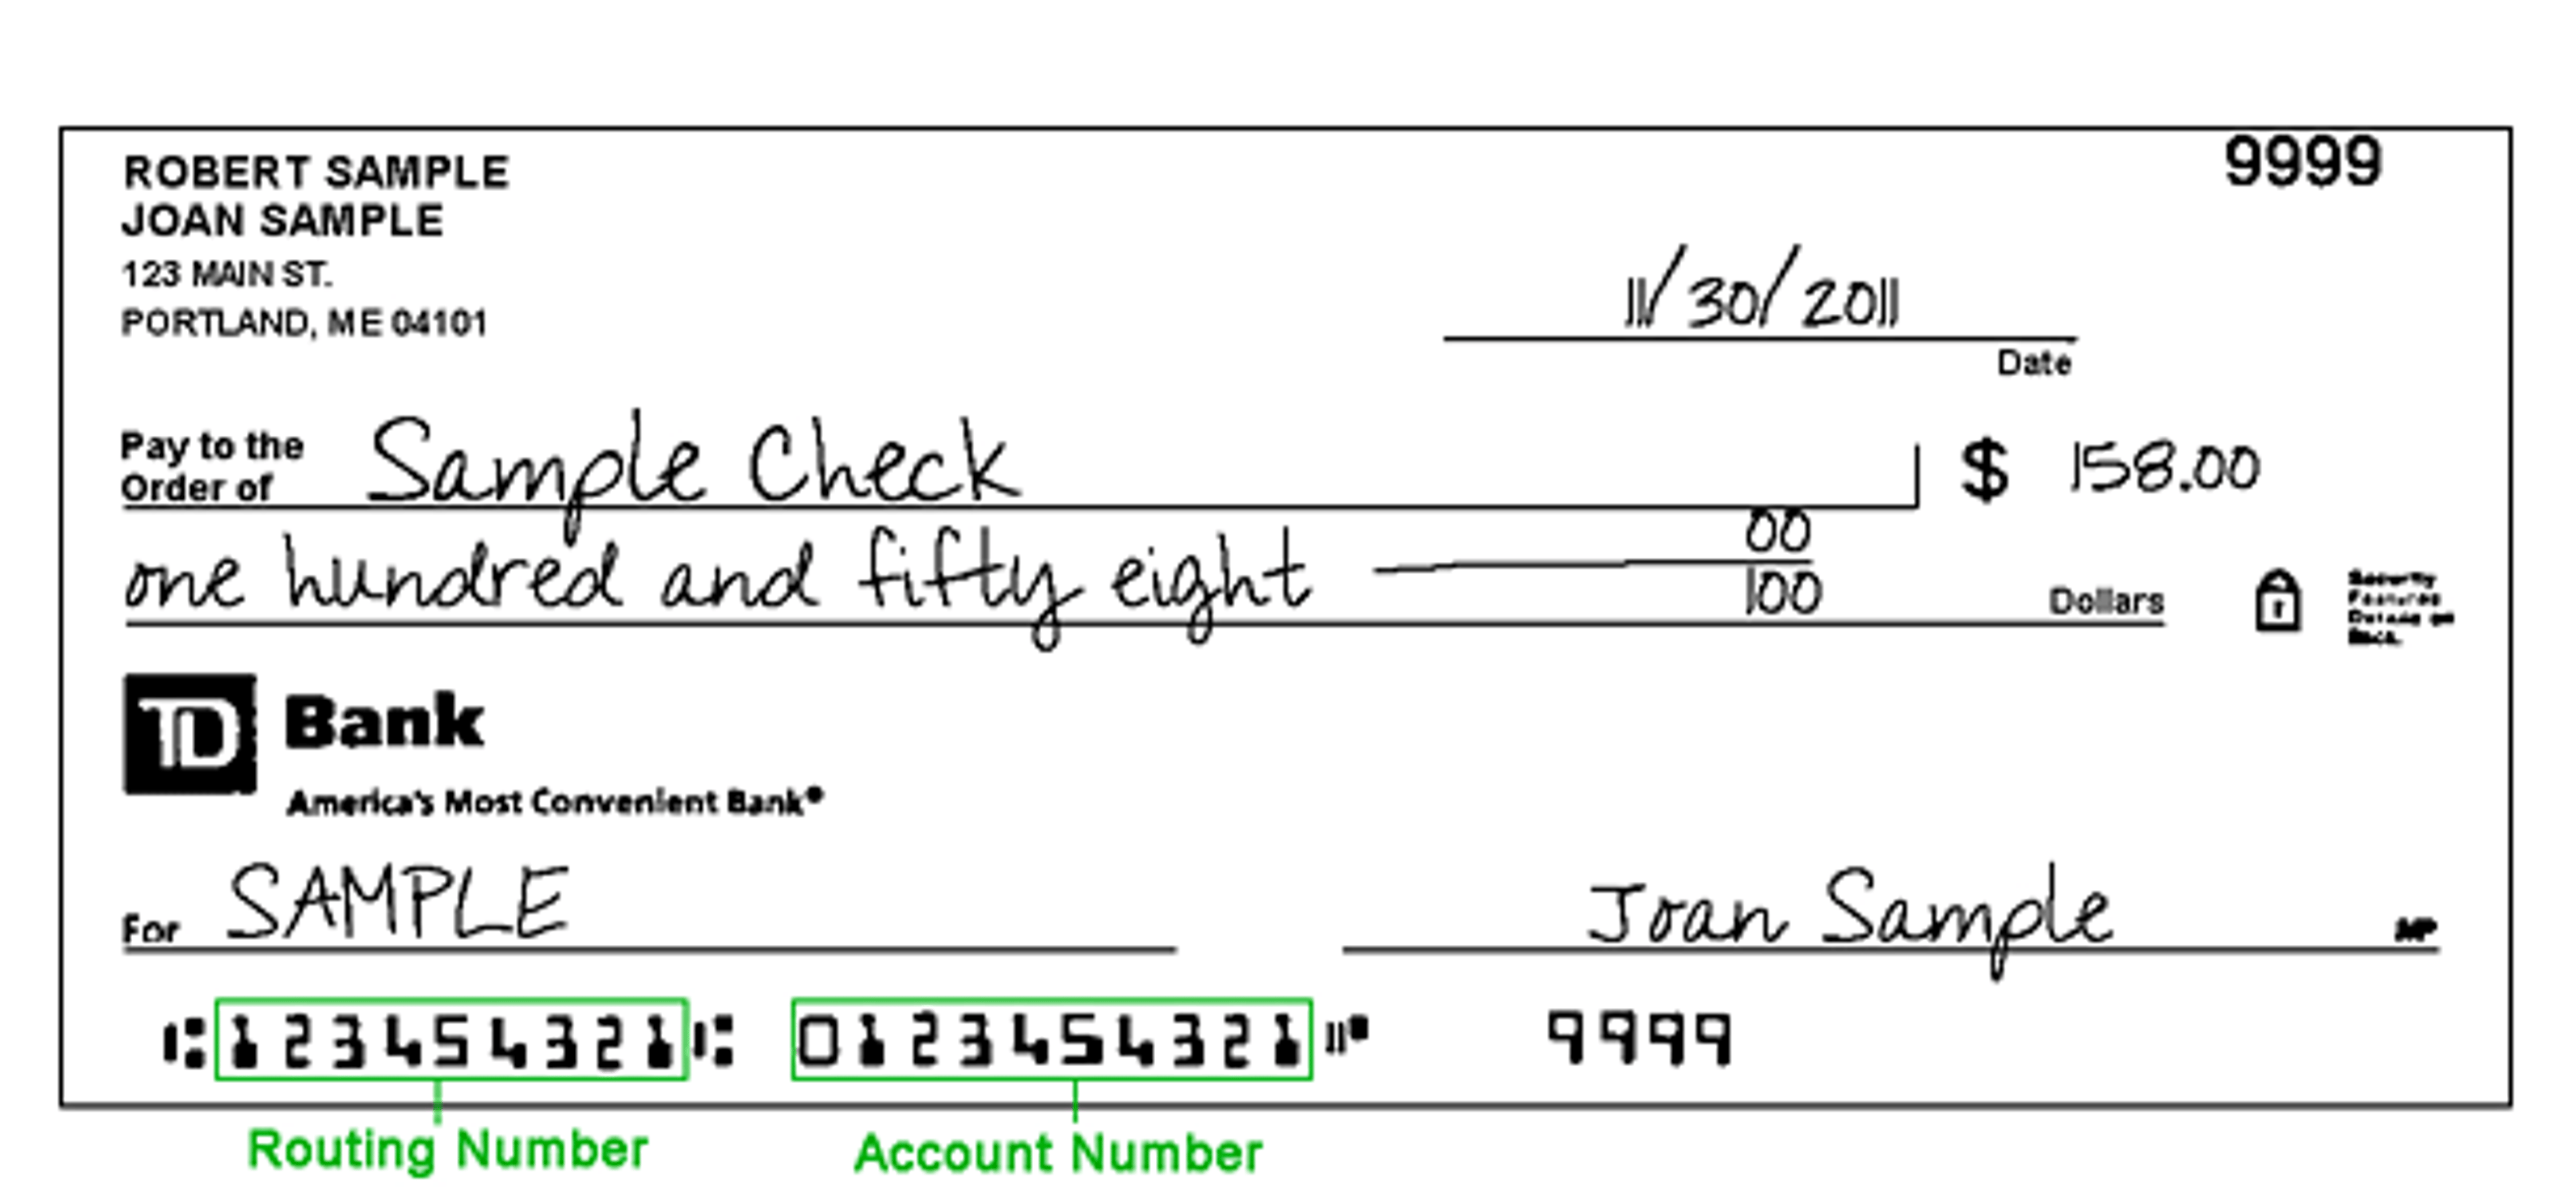 Sample of a check